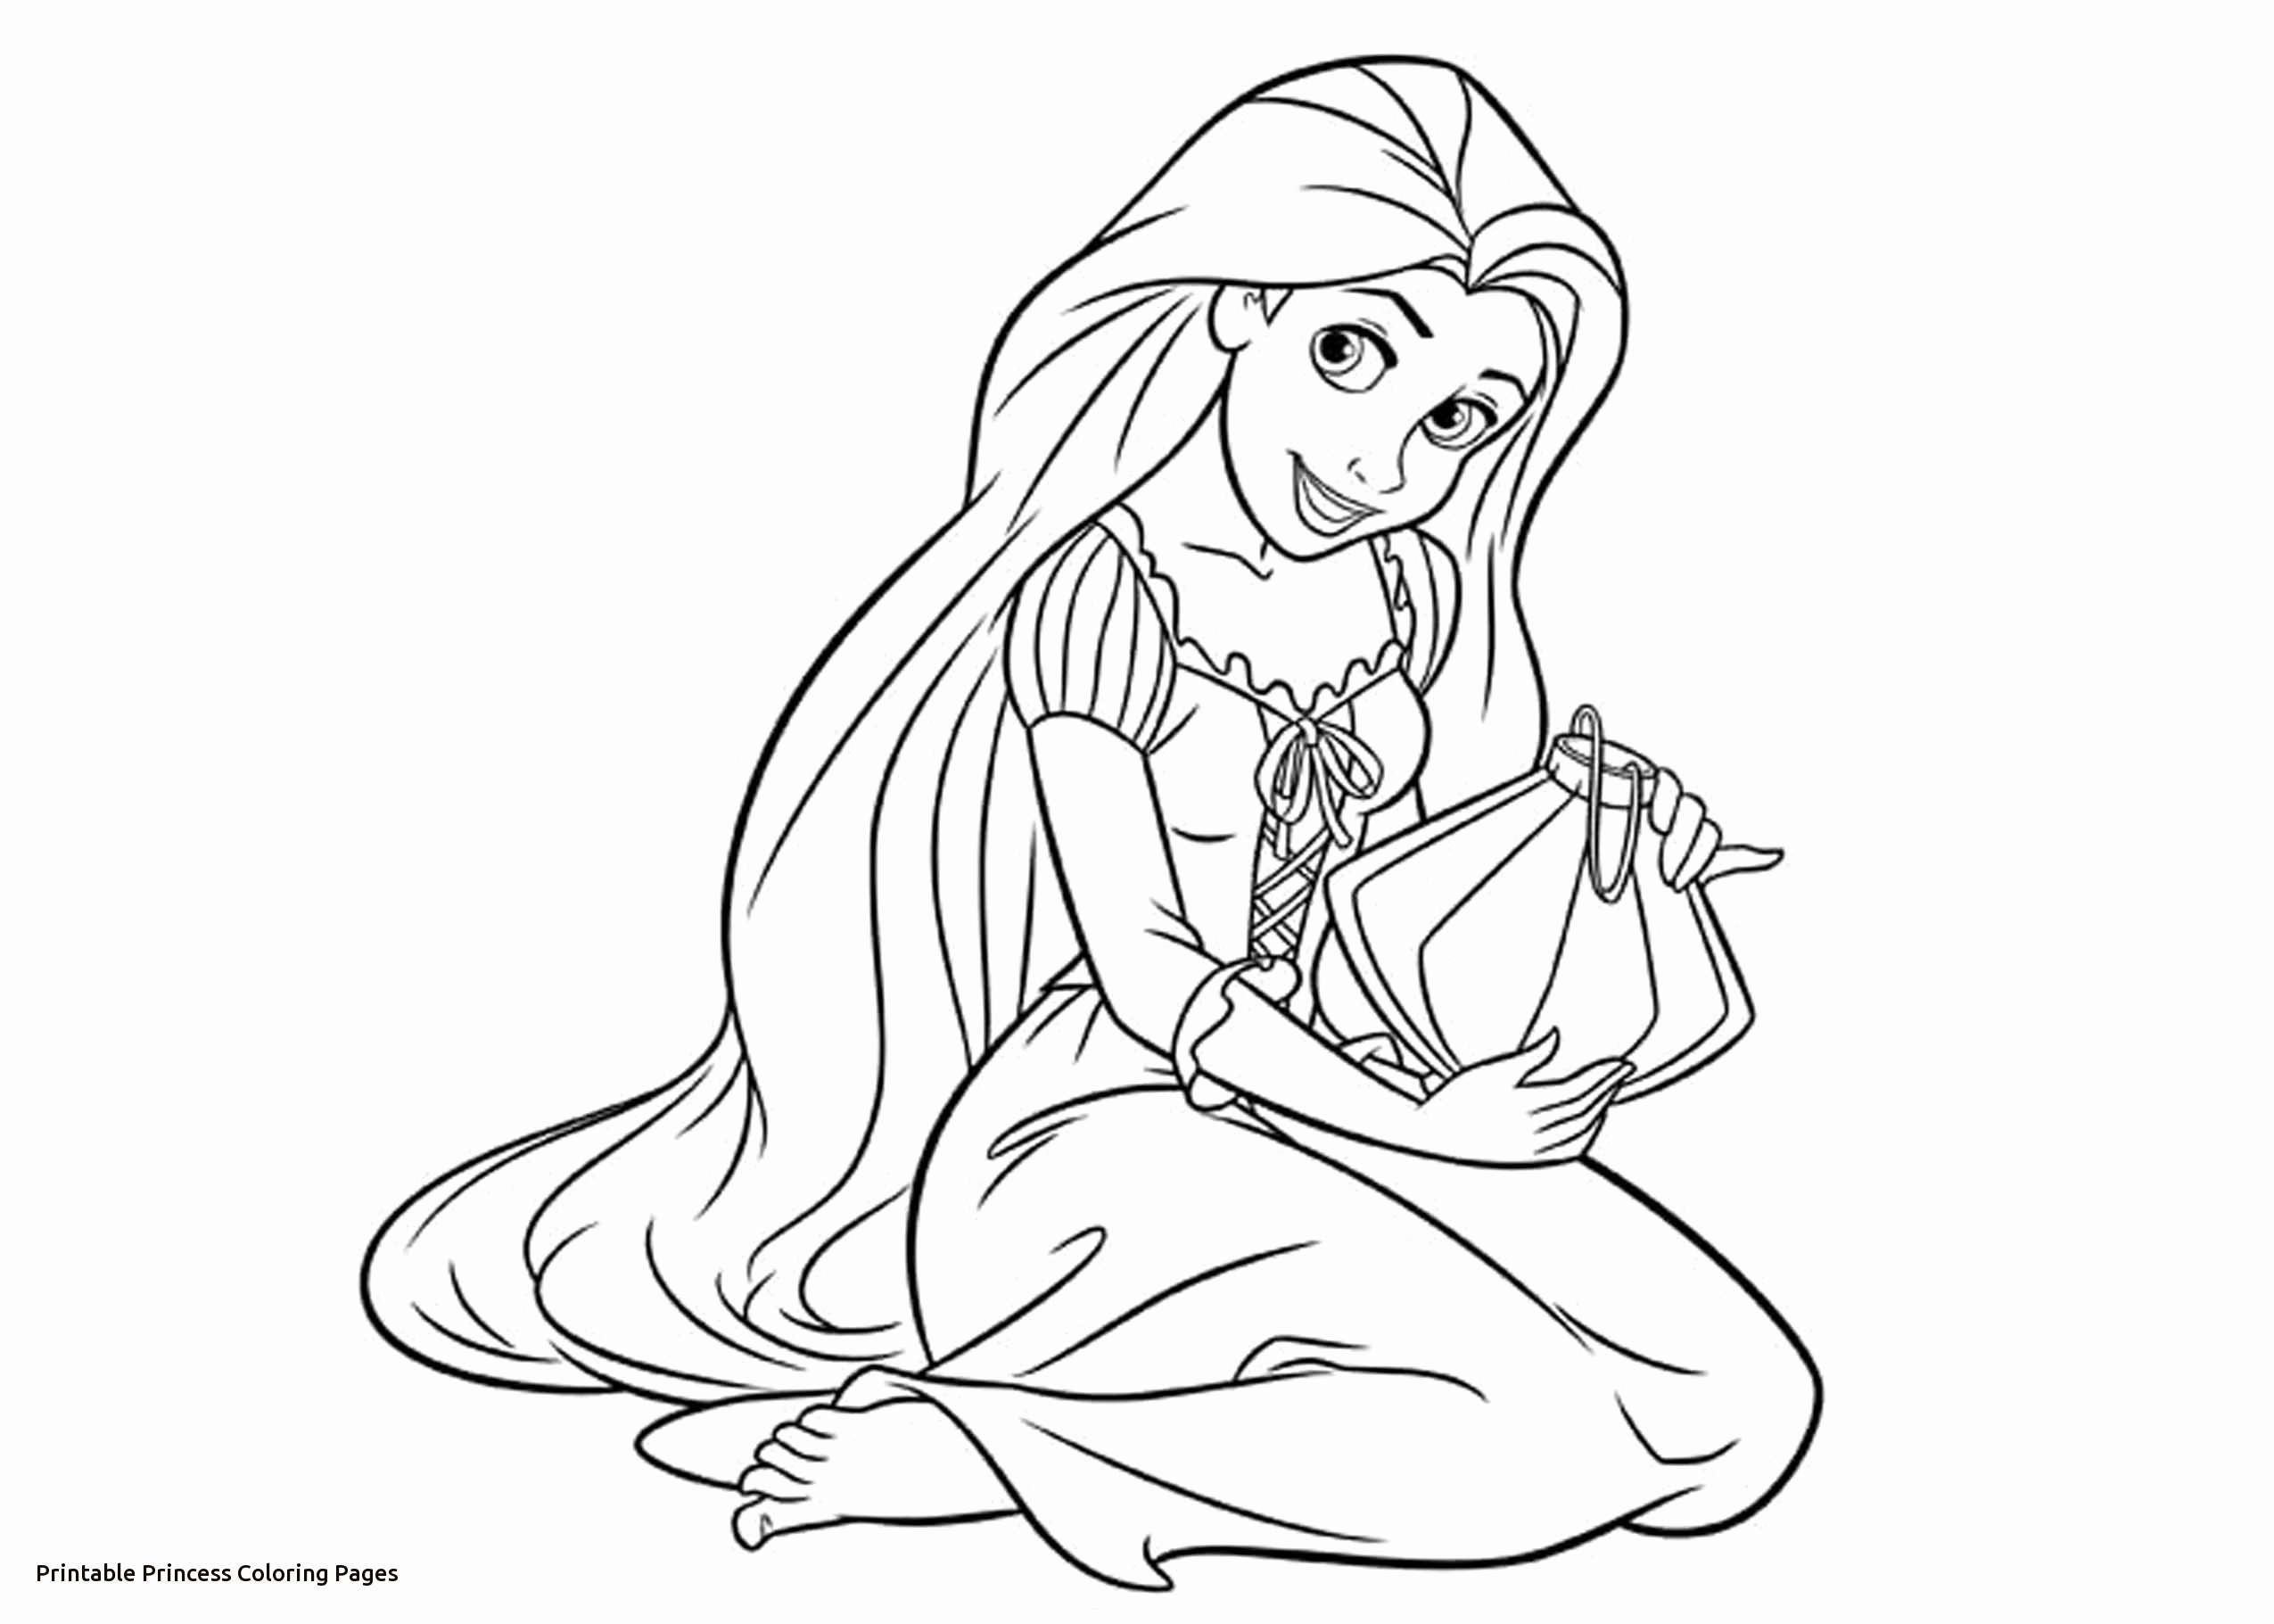 Coloring Pages : Detailed Disney Princess Coloring Pages Best Ofable - Free Printable Princess Coloring Pages